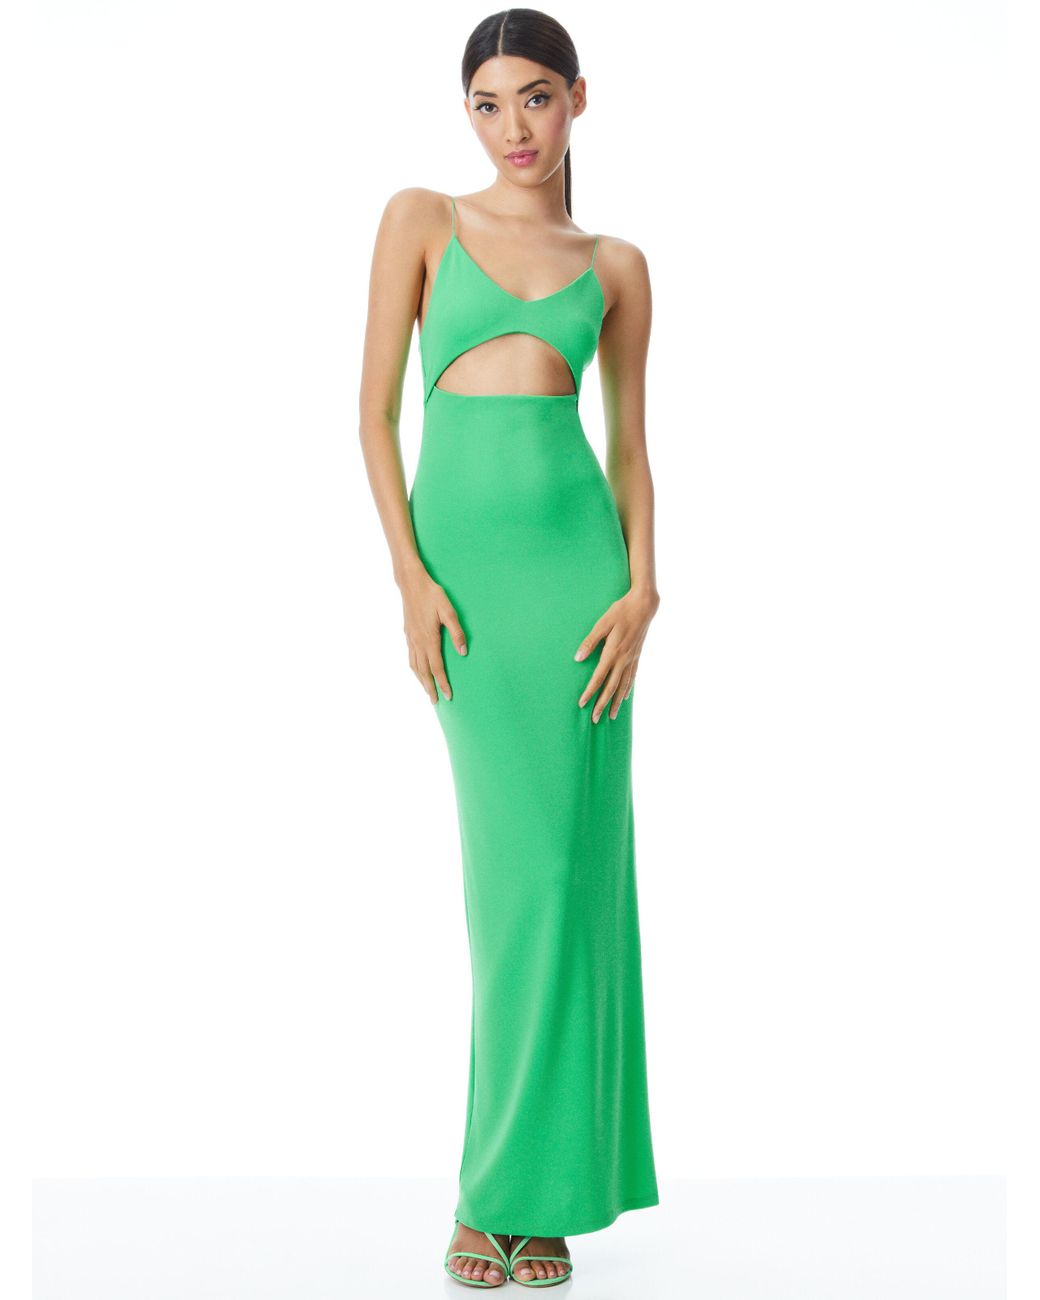 Alice + Olivia Alice + Olivia Valli Cut Out Cami Dress in Green | Lyst